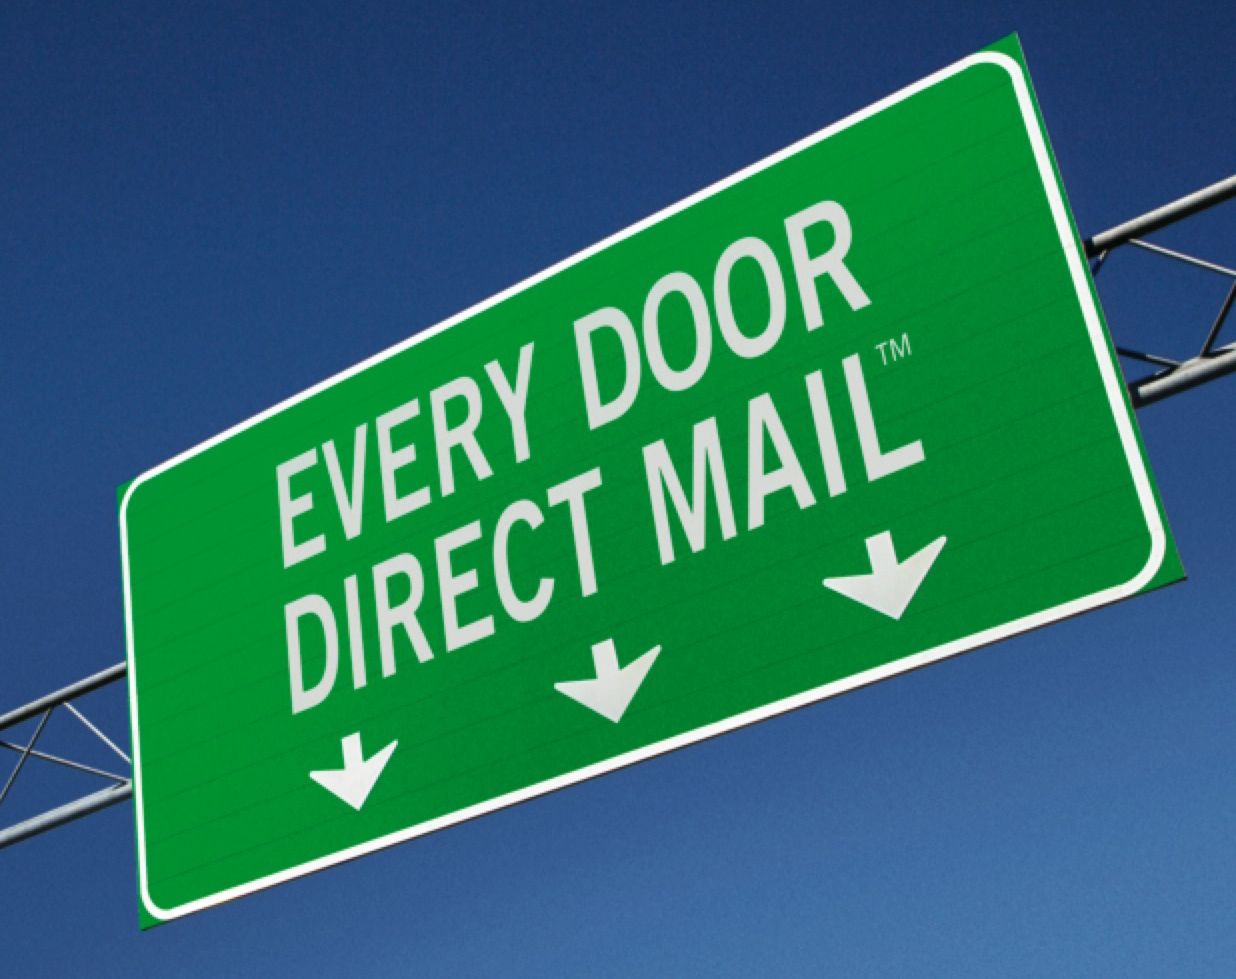 Every Door Direct Mail at Minuteman Press Central